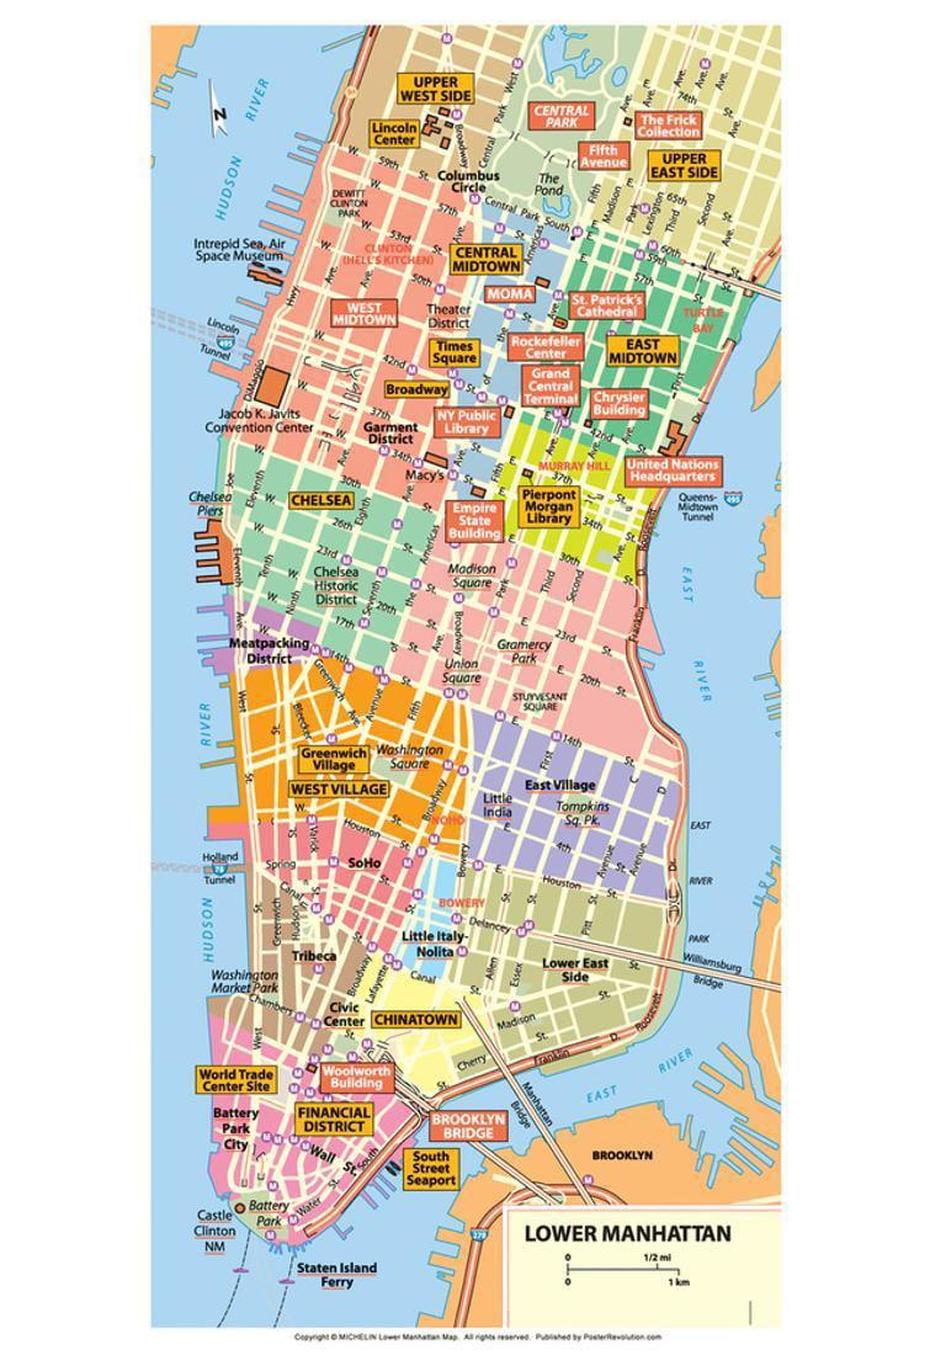 Michelin Official Lower Manhattan Nyc Map Art Print Poster – 13X19 …, Manhattan, United States, United States  Color, United States  With City